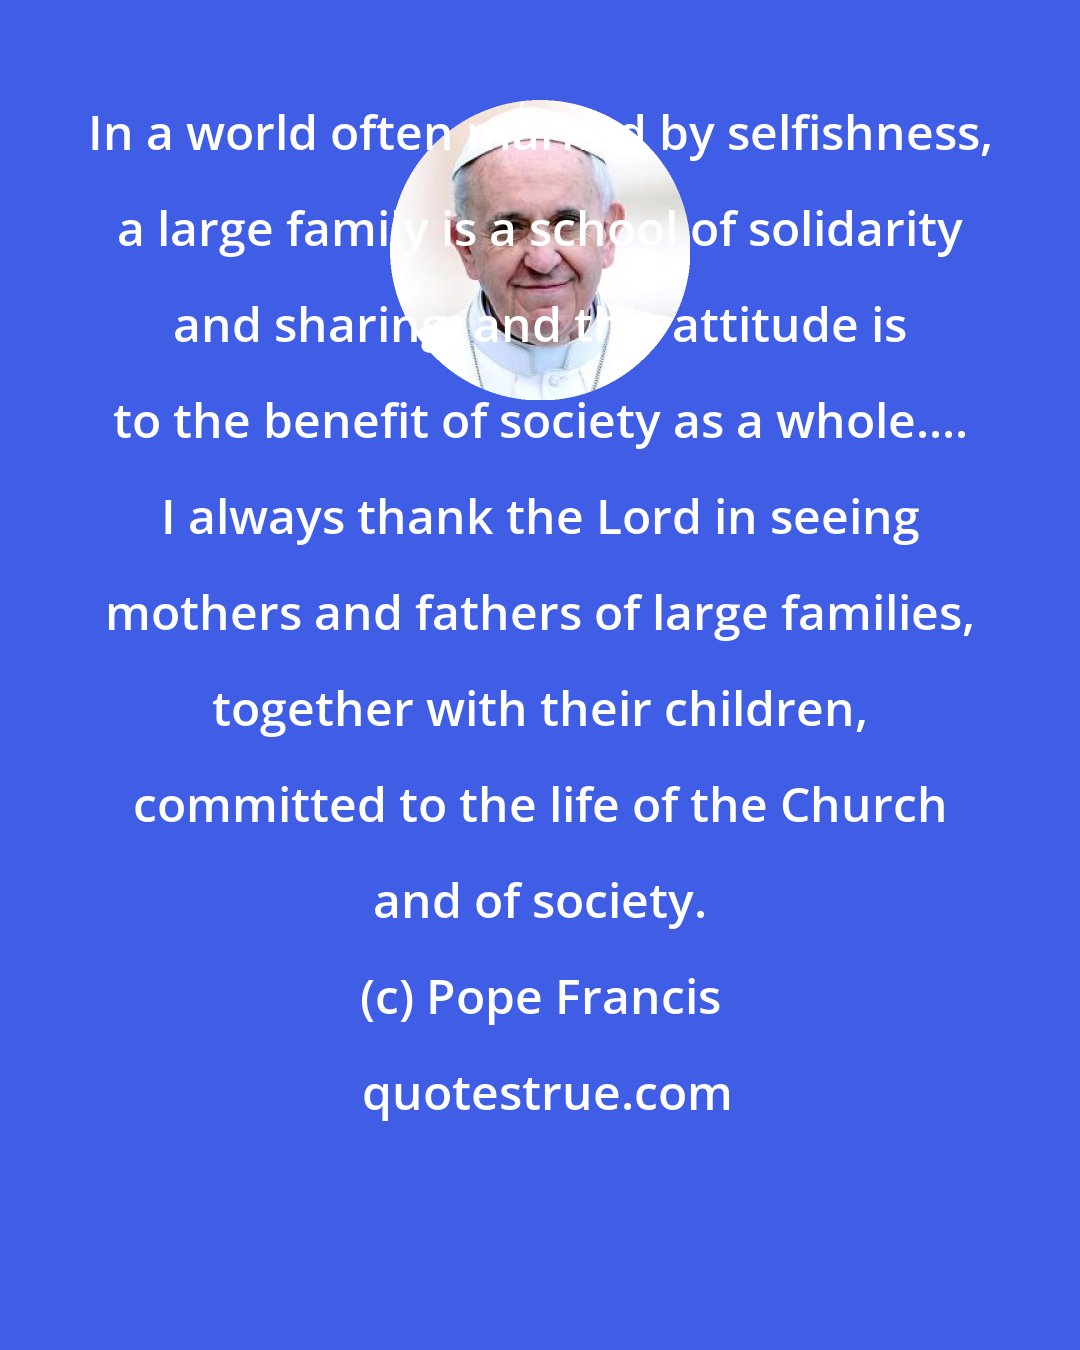 Pope Francis: In a world often marked by selfishness, a large family is a school of solidarity and sharing; and this attitude is to the benefit of society as a whole.... I always thank the Lord in seeing mothers and fathers of large families, together with their children, committed to the life of the Church and of society.